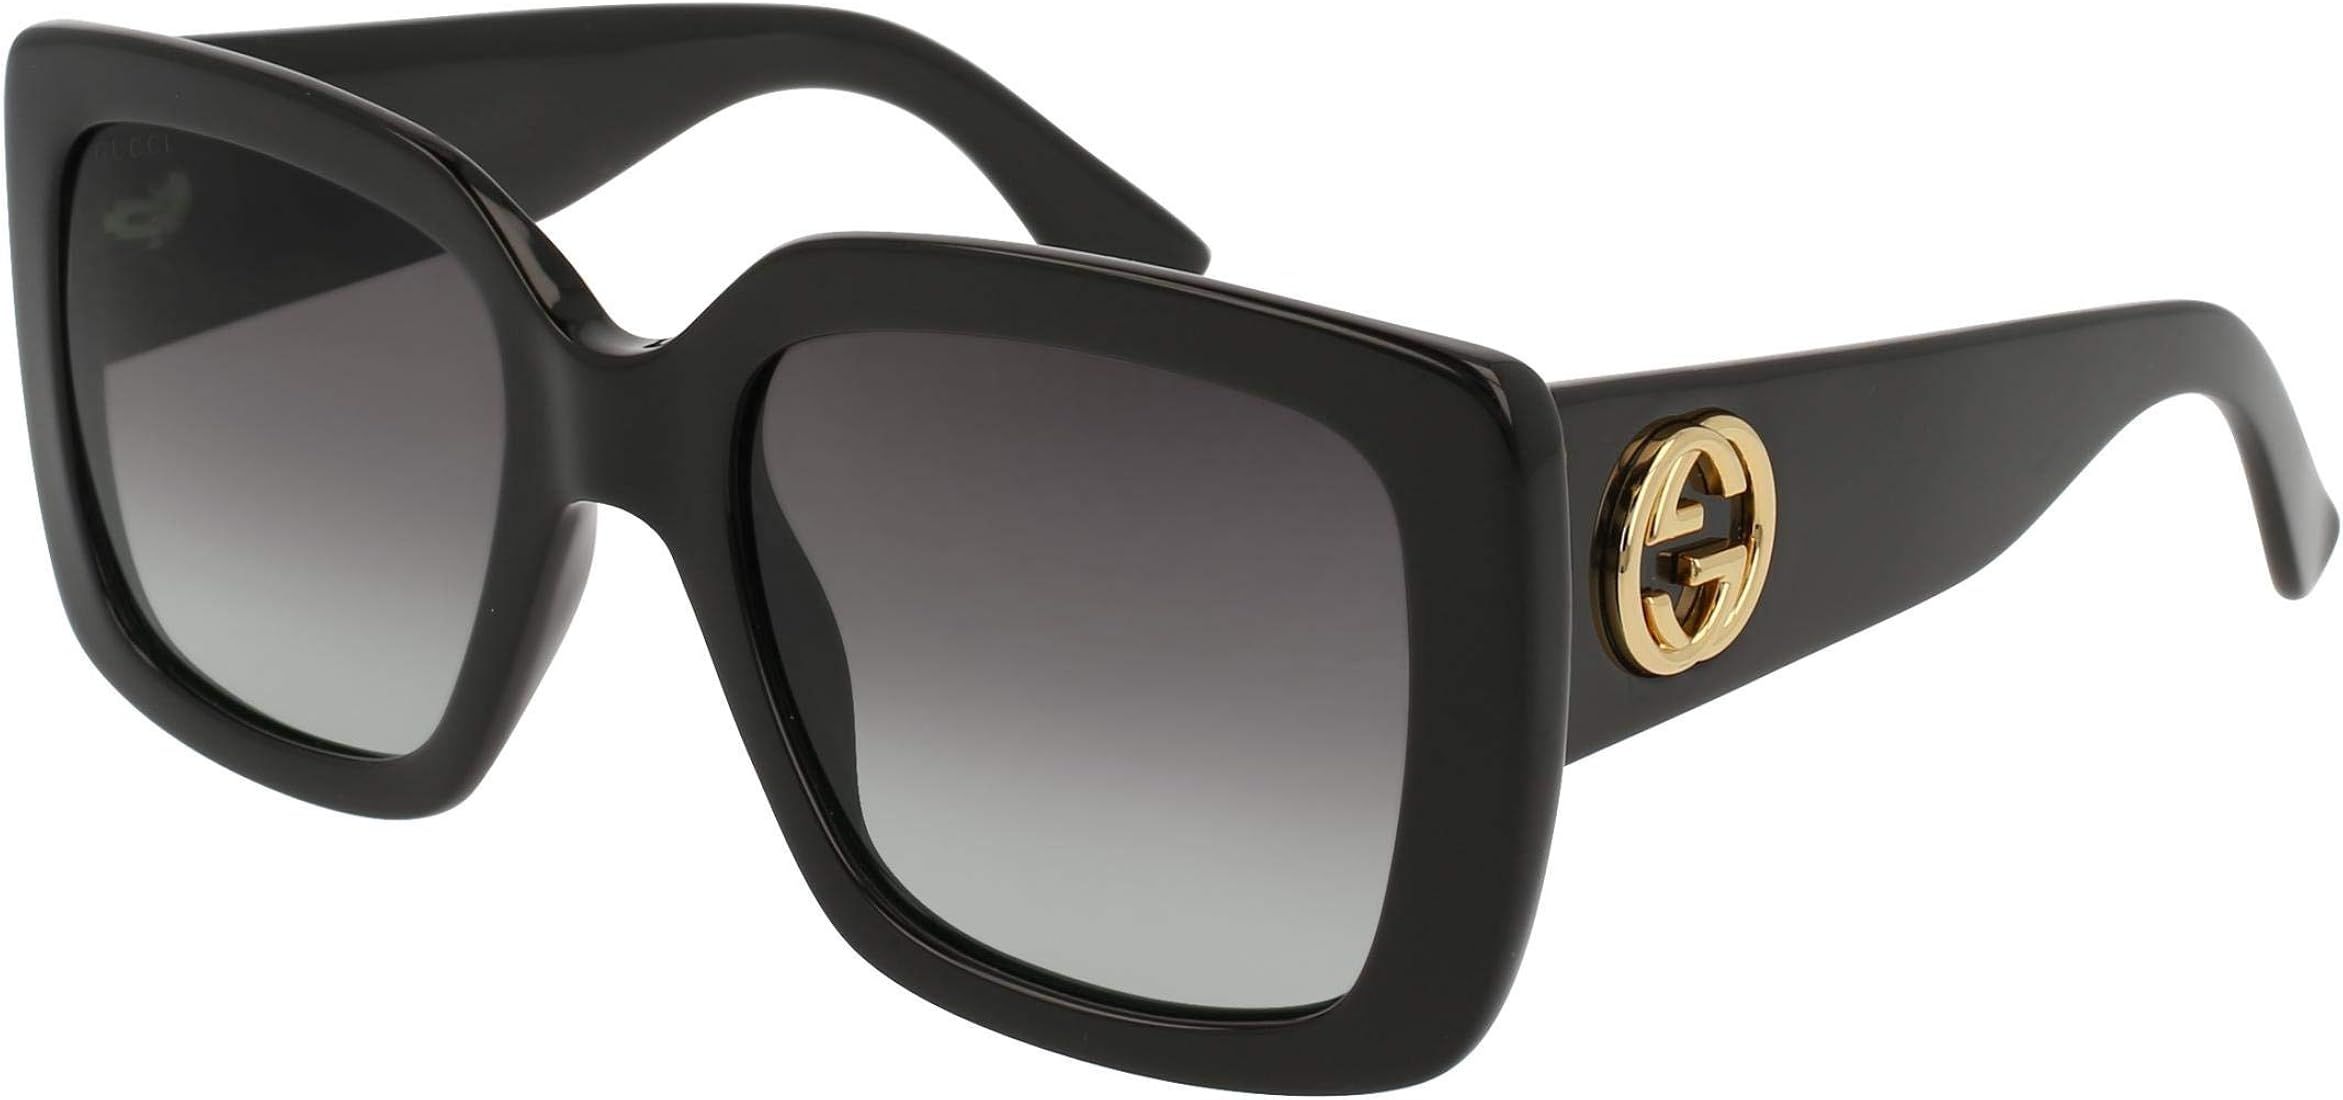 Gucci GG0141S 001 Black GG0141S Square Sunglasses Lens Category 2 Size 53mm, womens | Amazon (US)